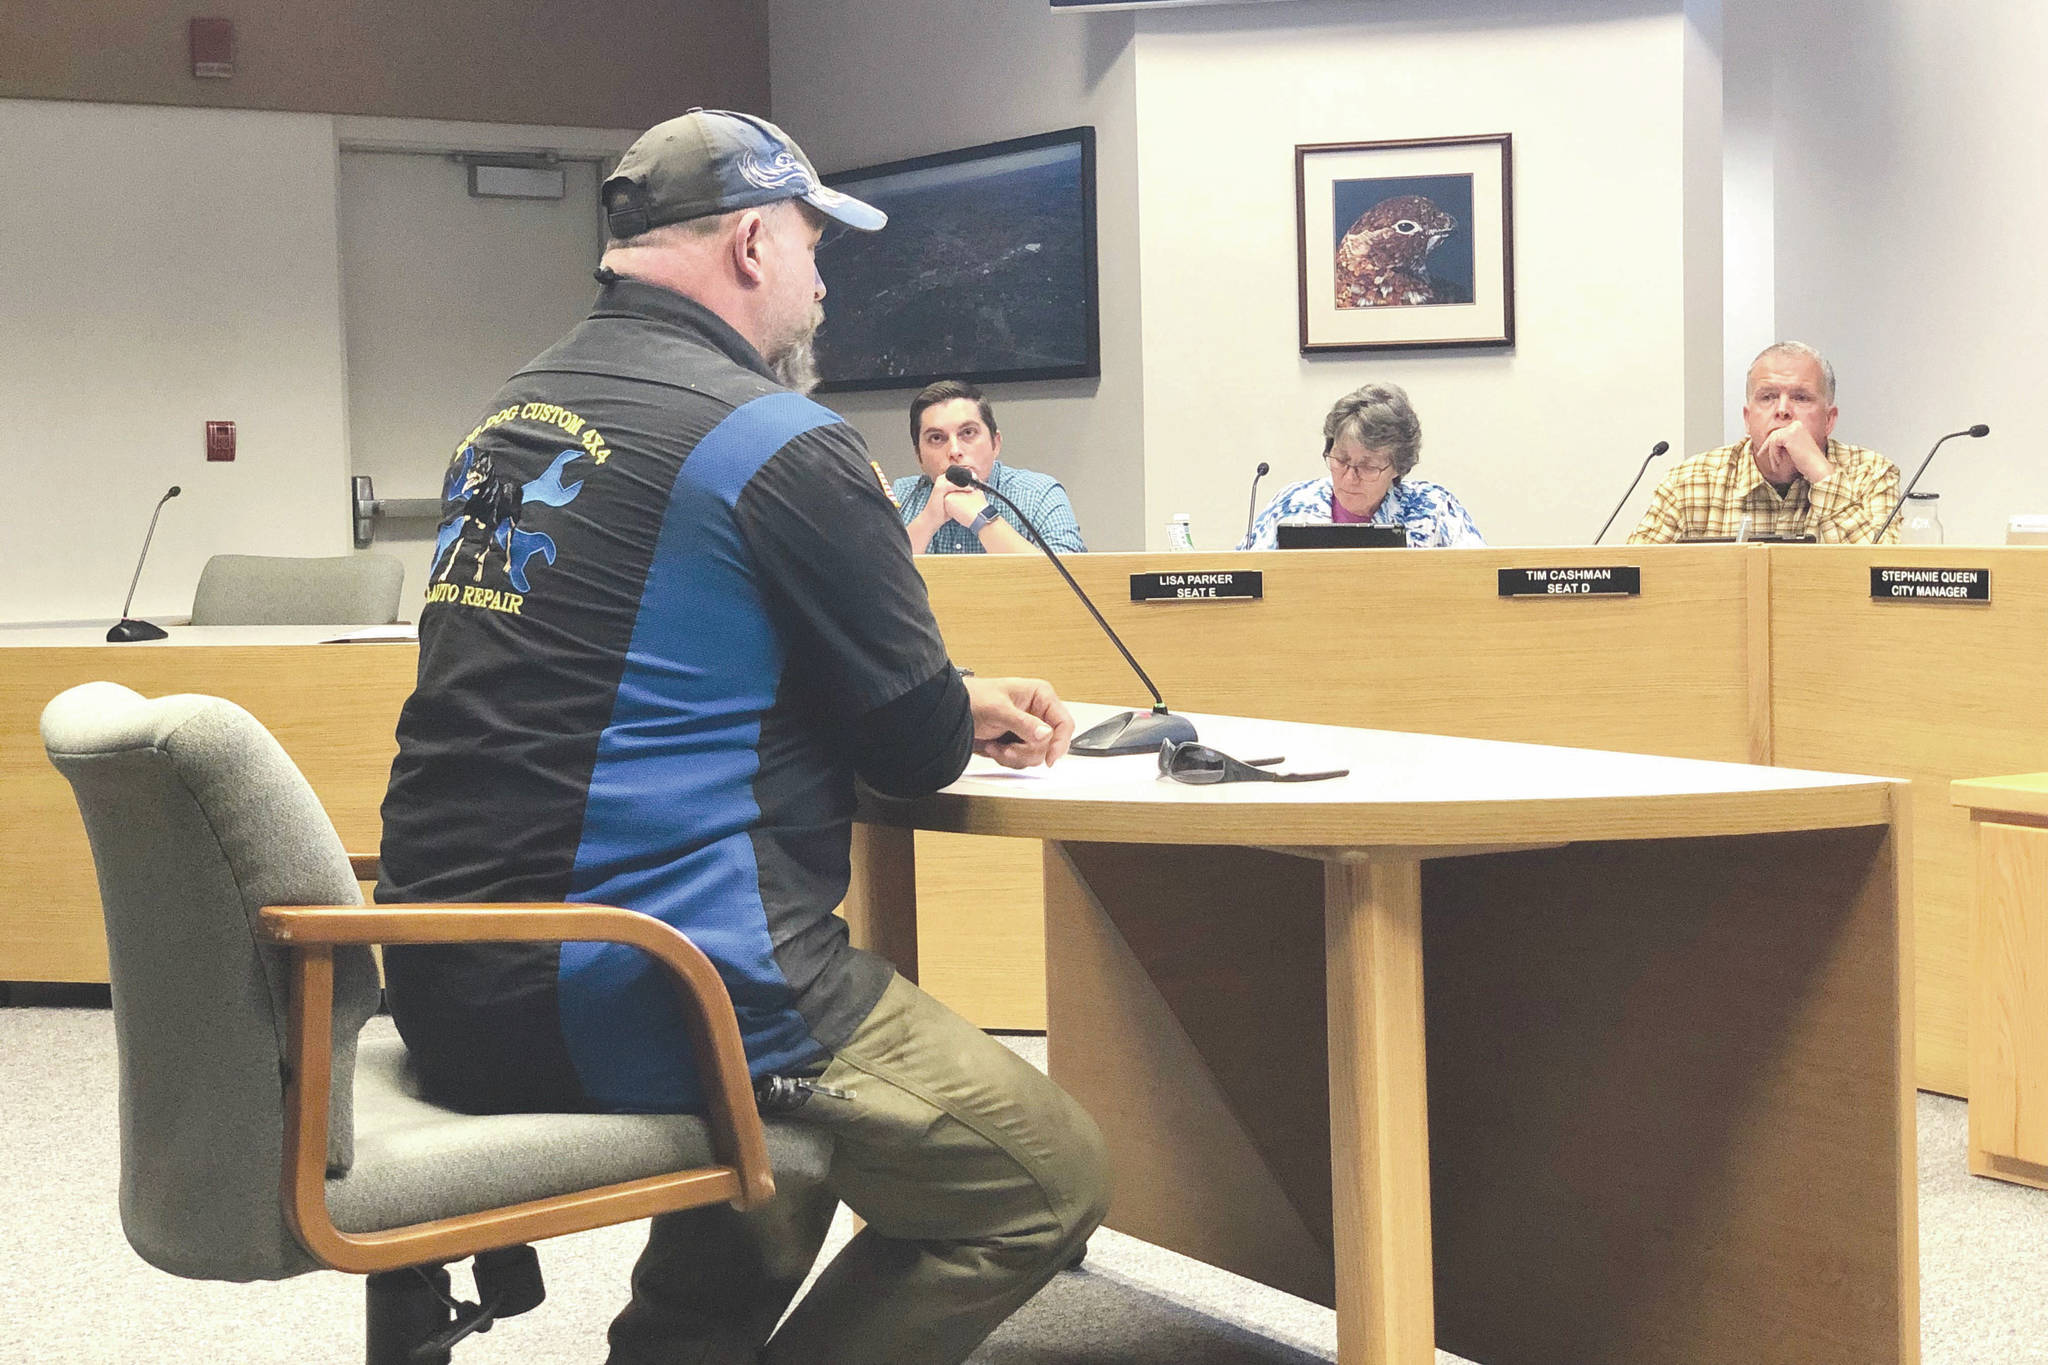 Borough Residents Against Annexation President Matthew Lay encourages the Soldotna City Council to postpone a vote to move forward with annexation efforts until after the city has elected new council members and a new mayor, on Thursday, Sept. 26, 2019, in Soldotna, Alaska. (Photo by Victoria Petersen/Peninsula Clarion)